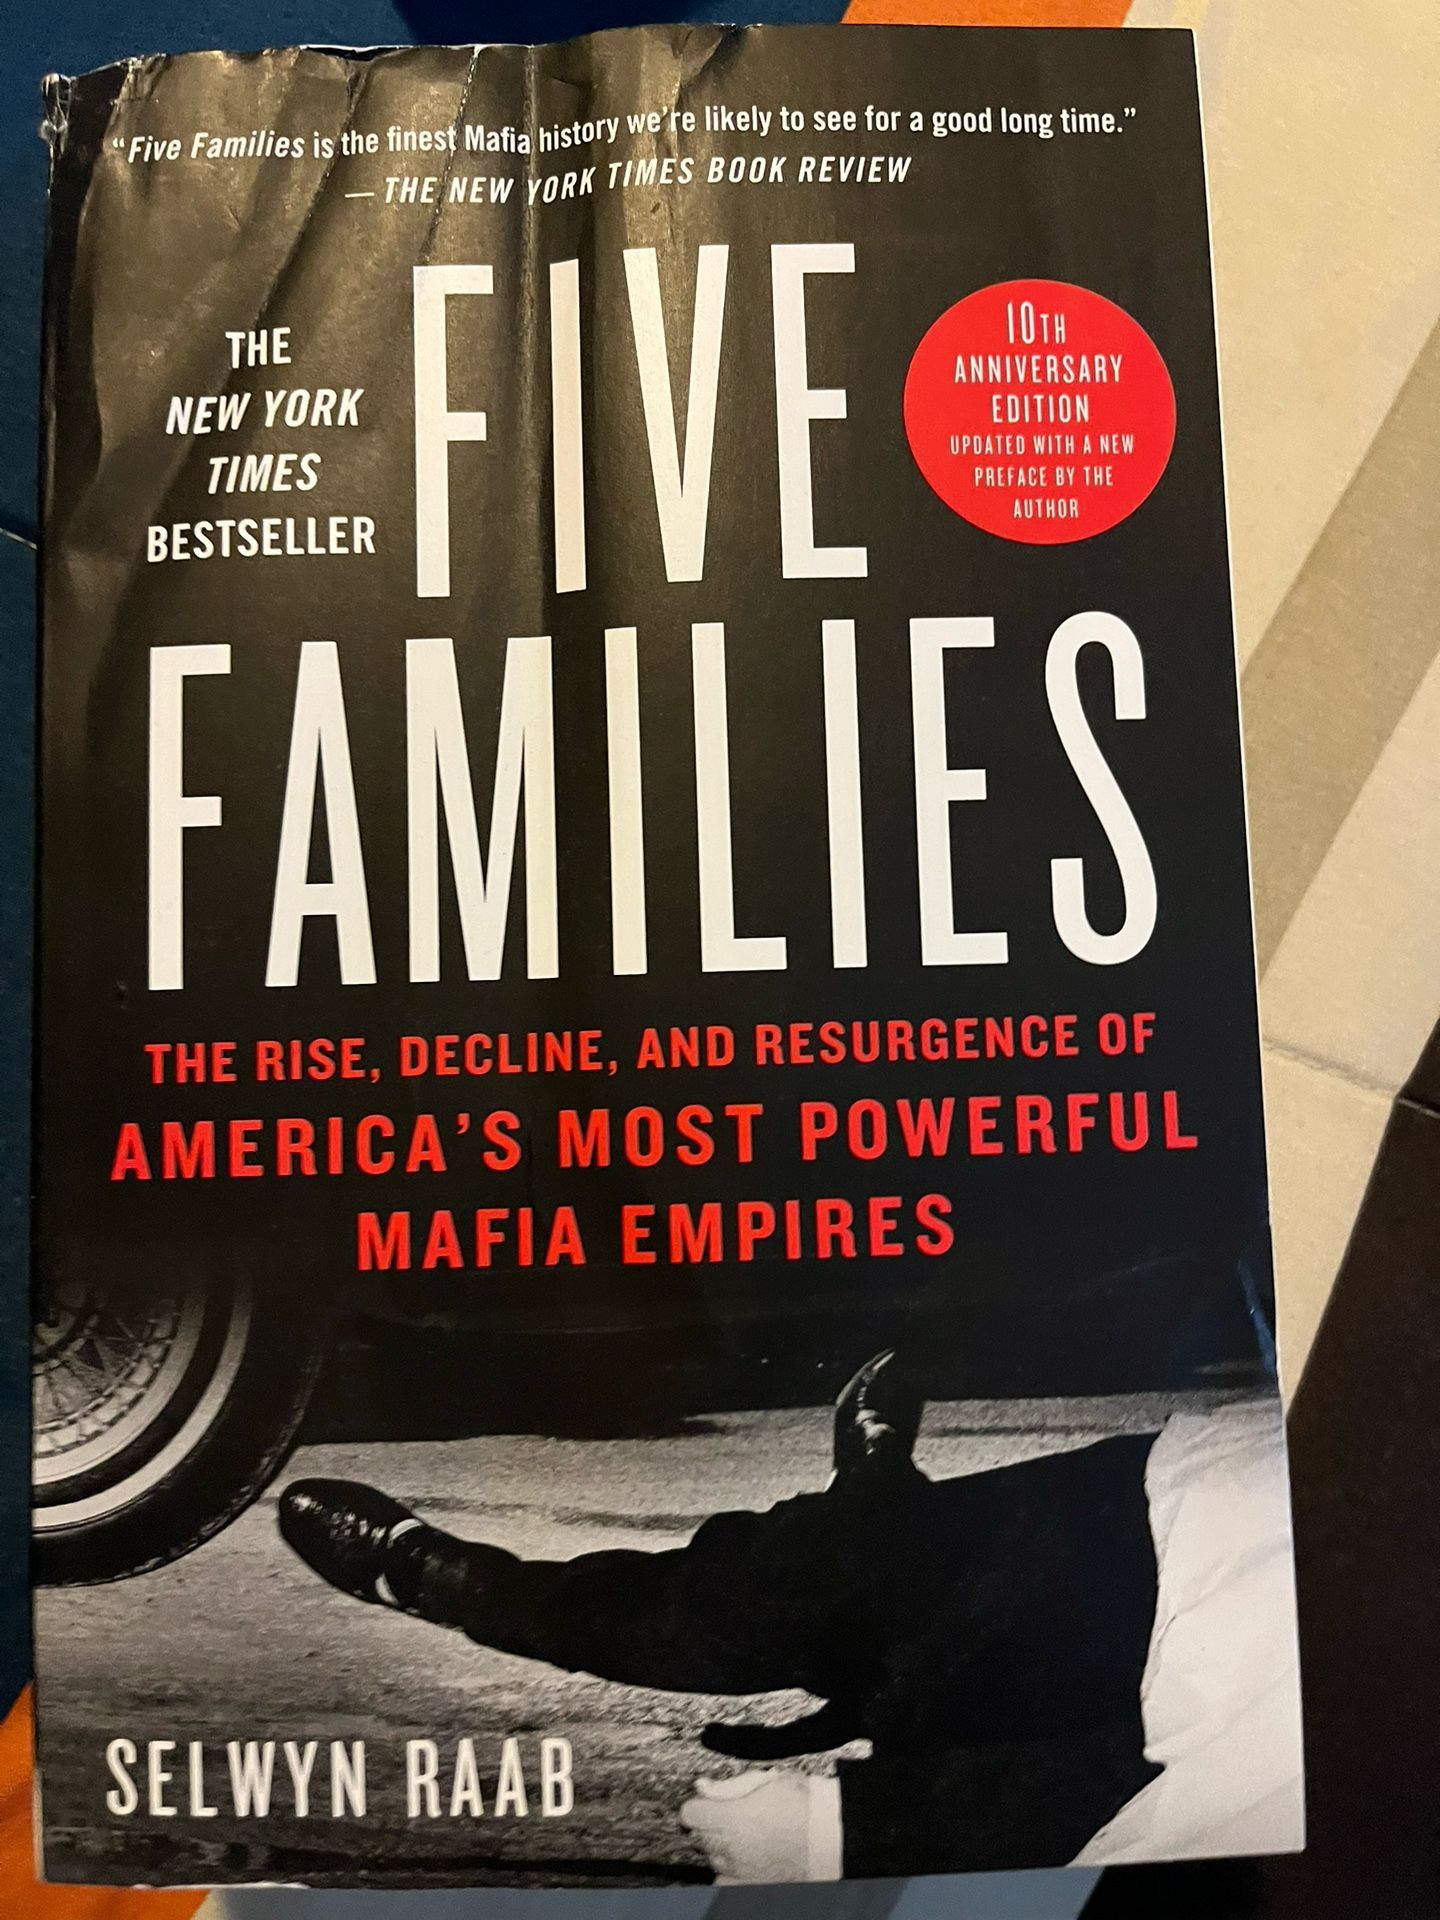  Five families book